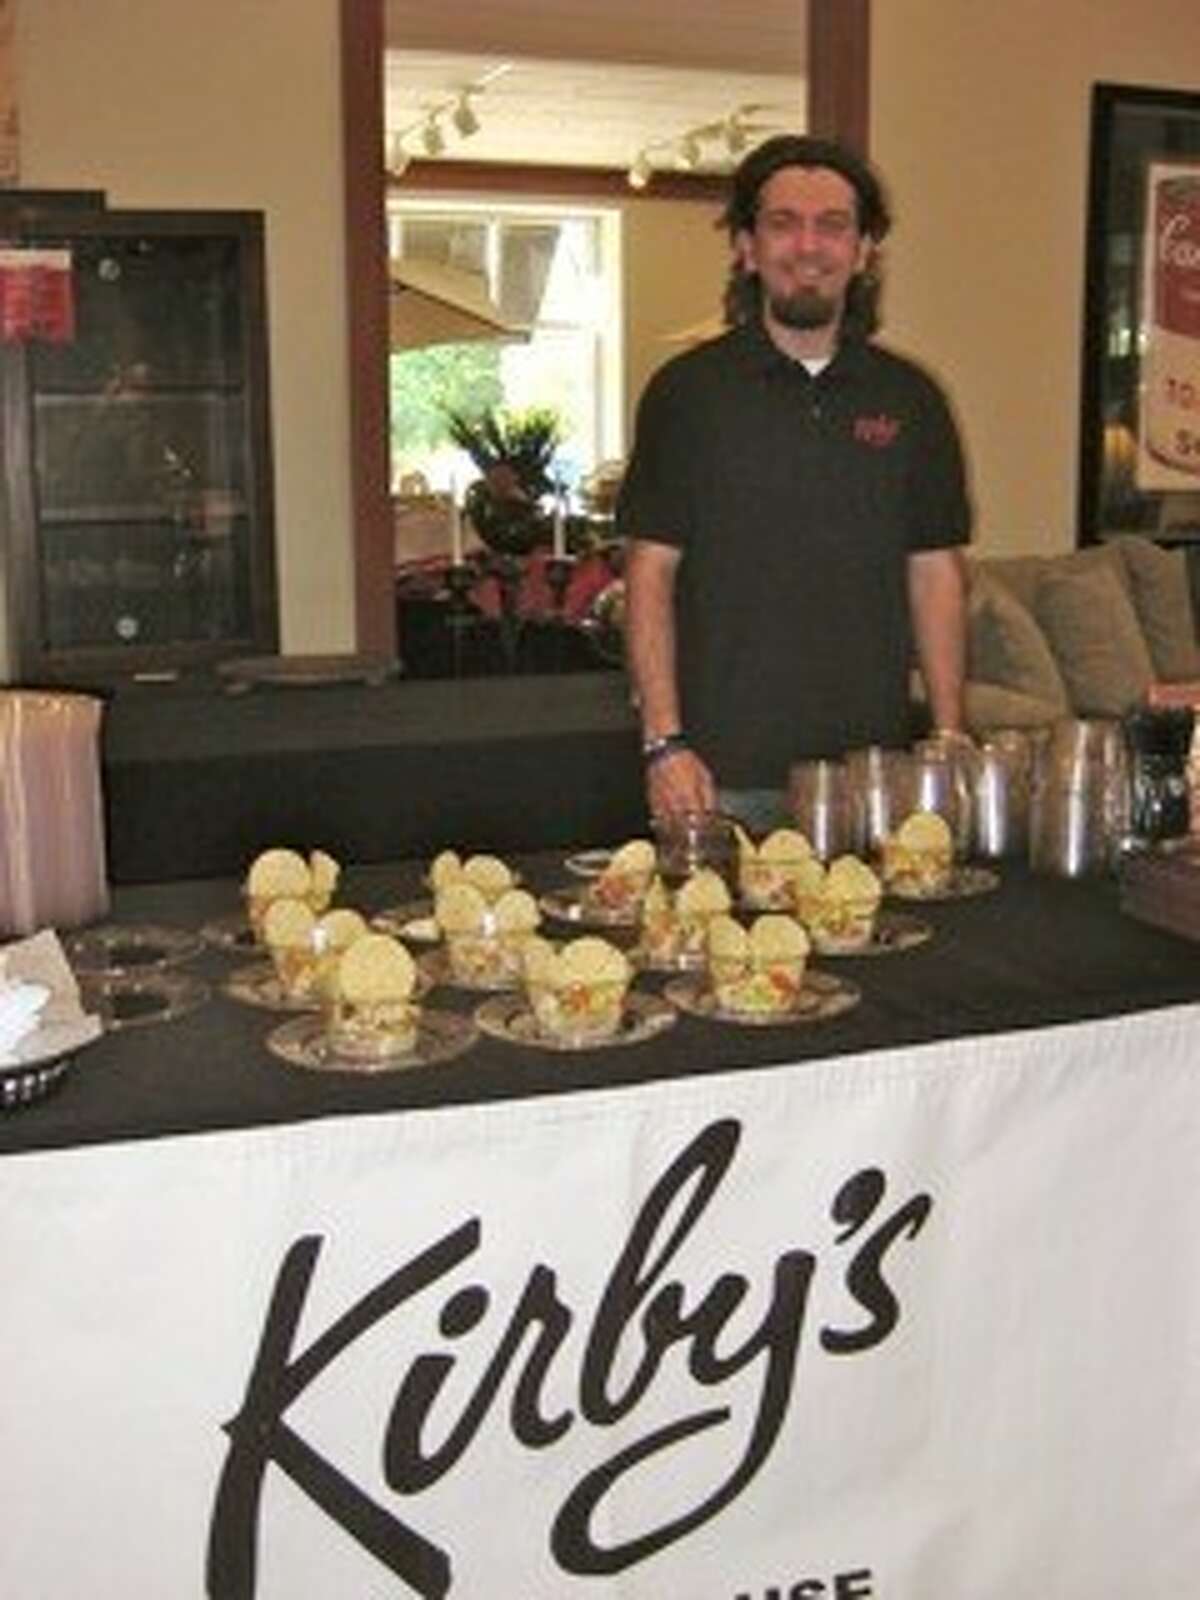 Kirby’s Steakhouse is among the 12 committed restaurants to date that will be providing samples of their signature dishes, along with fine wines with up to 50 domestic wineries represented, at the WineFest event benefiting the Montgomery County Women’s Center on April 26 from 6 to 9 p.m.at Macy’s Furniture Gallery at The Woodlands Mall.